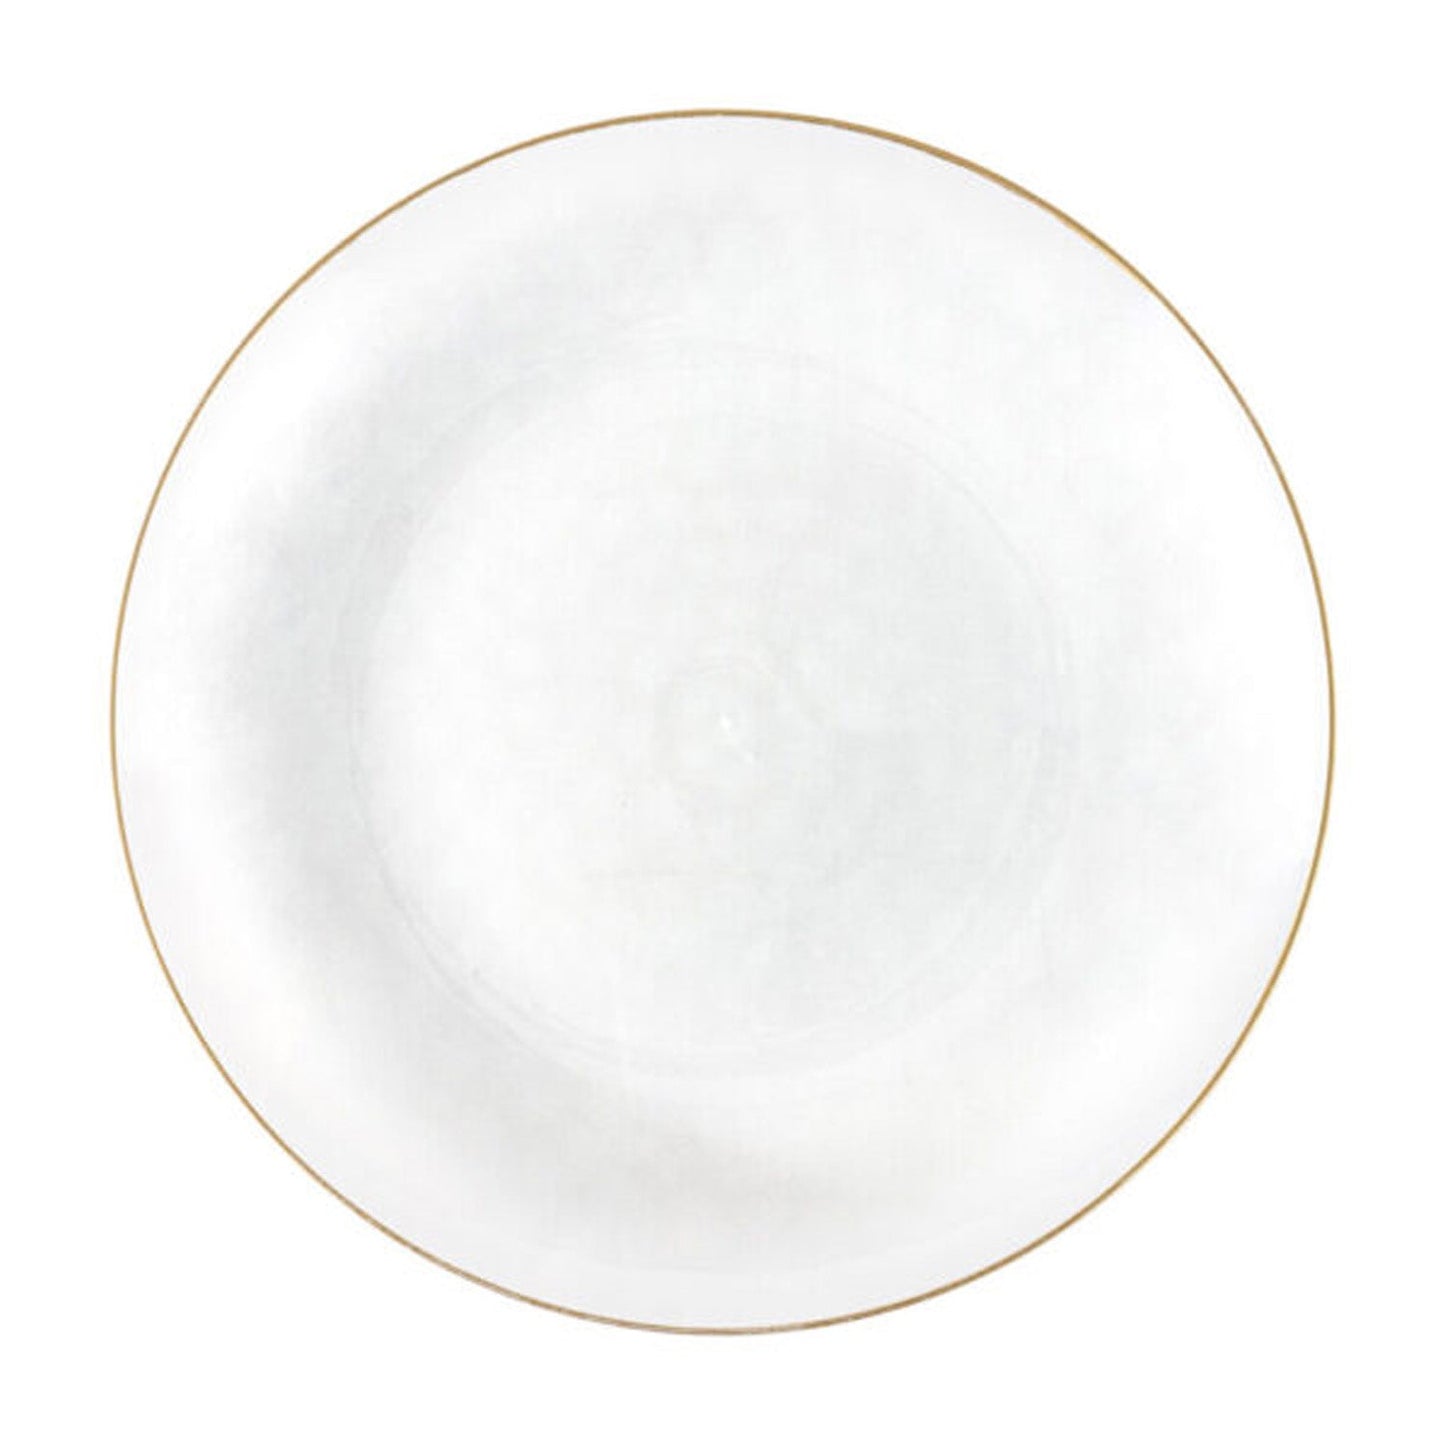 Organic Hammered White Transparent Gold Rim 10″ Plates Tablesettings Blue Sky 10 Pieces  